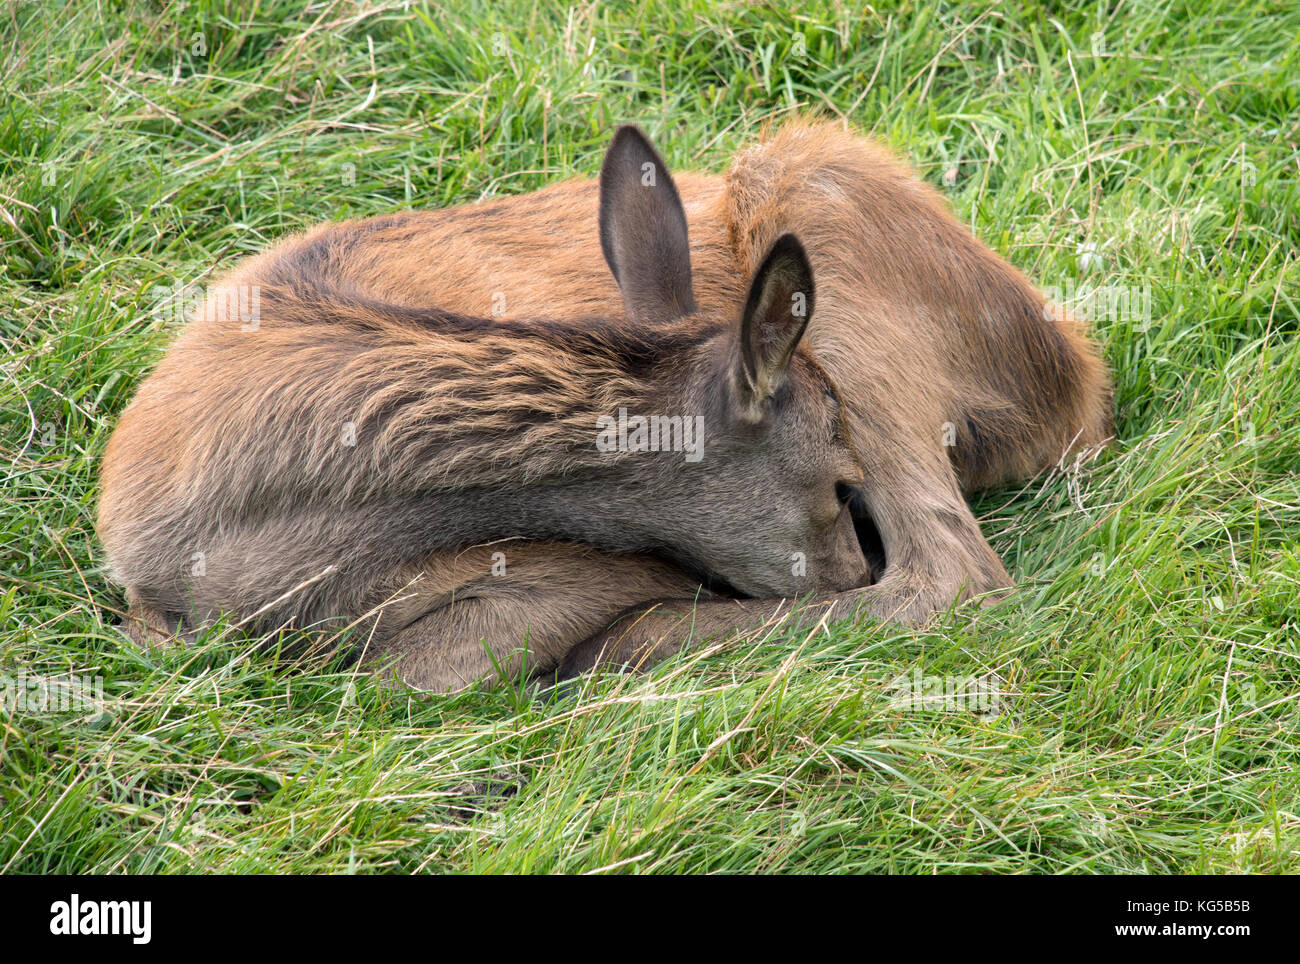 Young red deer calf asleep in the grass Stock Photo